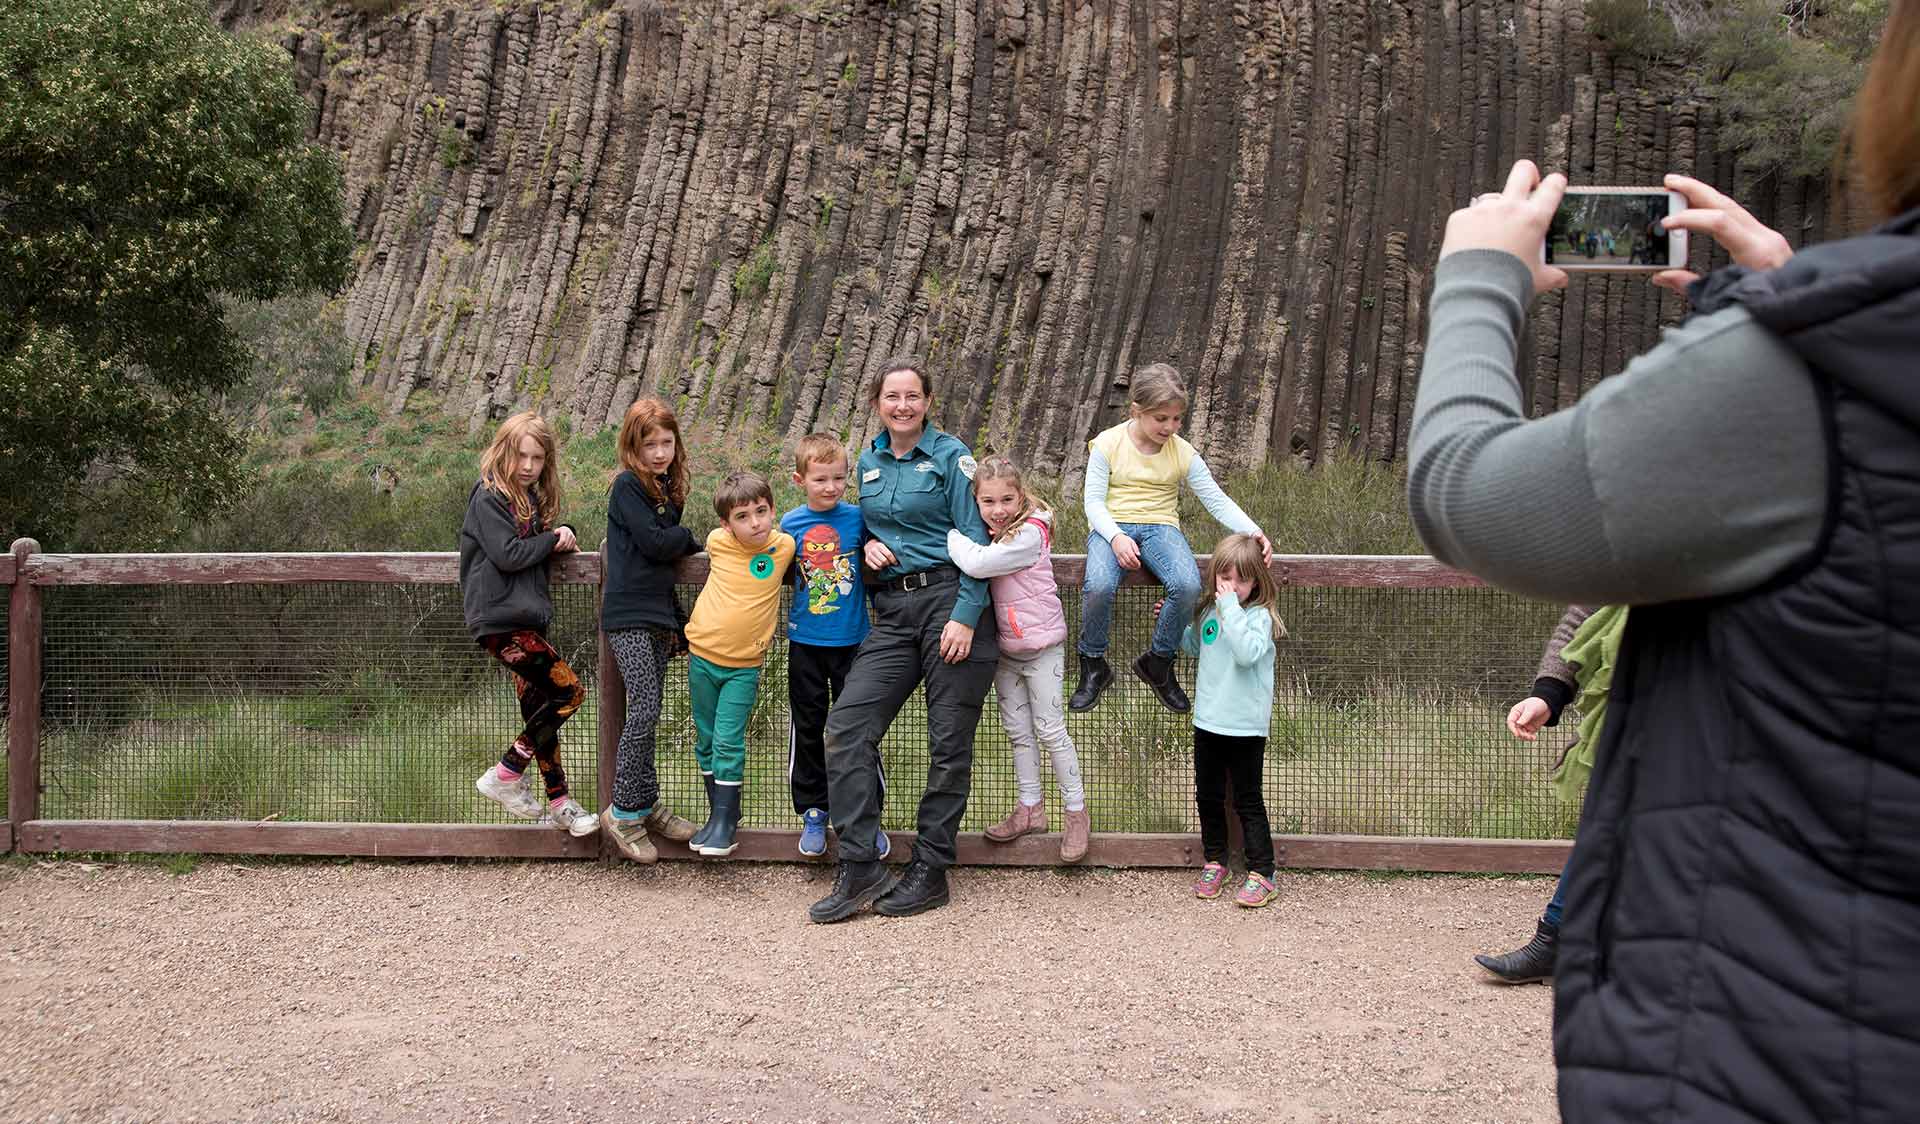 A Parks Victoria Ranger poses for a photograph with 7 young children in the Junior Rangers Program in front of the rock formation at Organ Pipes National Park.